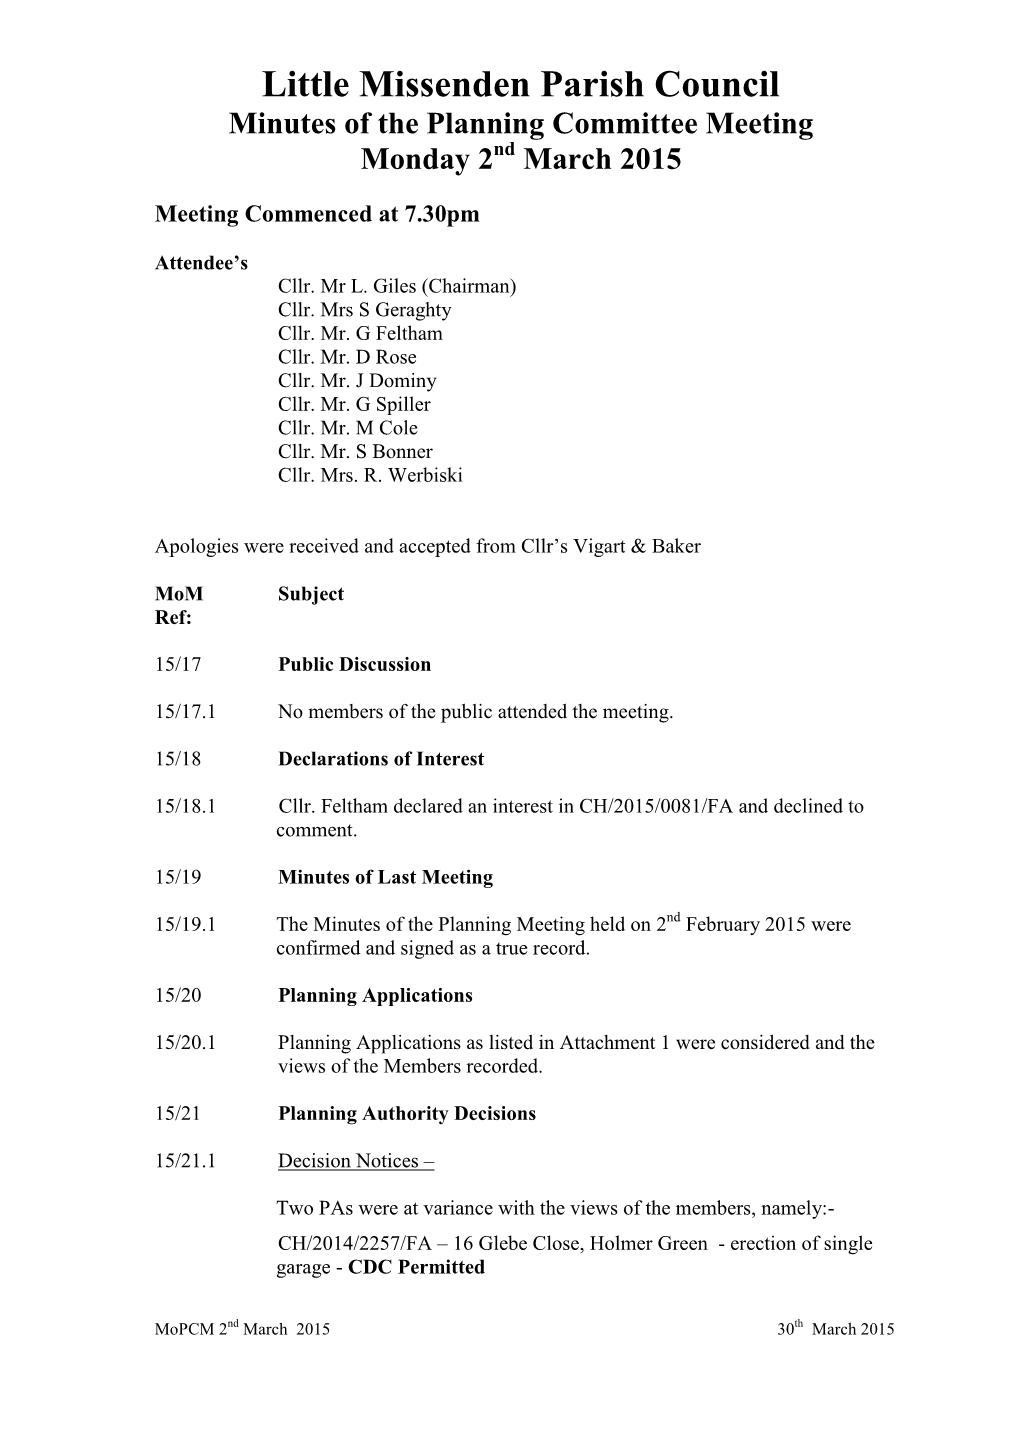 Little Missenden Parish Council Minutes of the Planning Committee Meeting Monday 2Nd March 2015